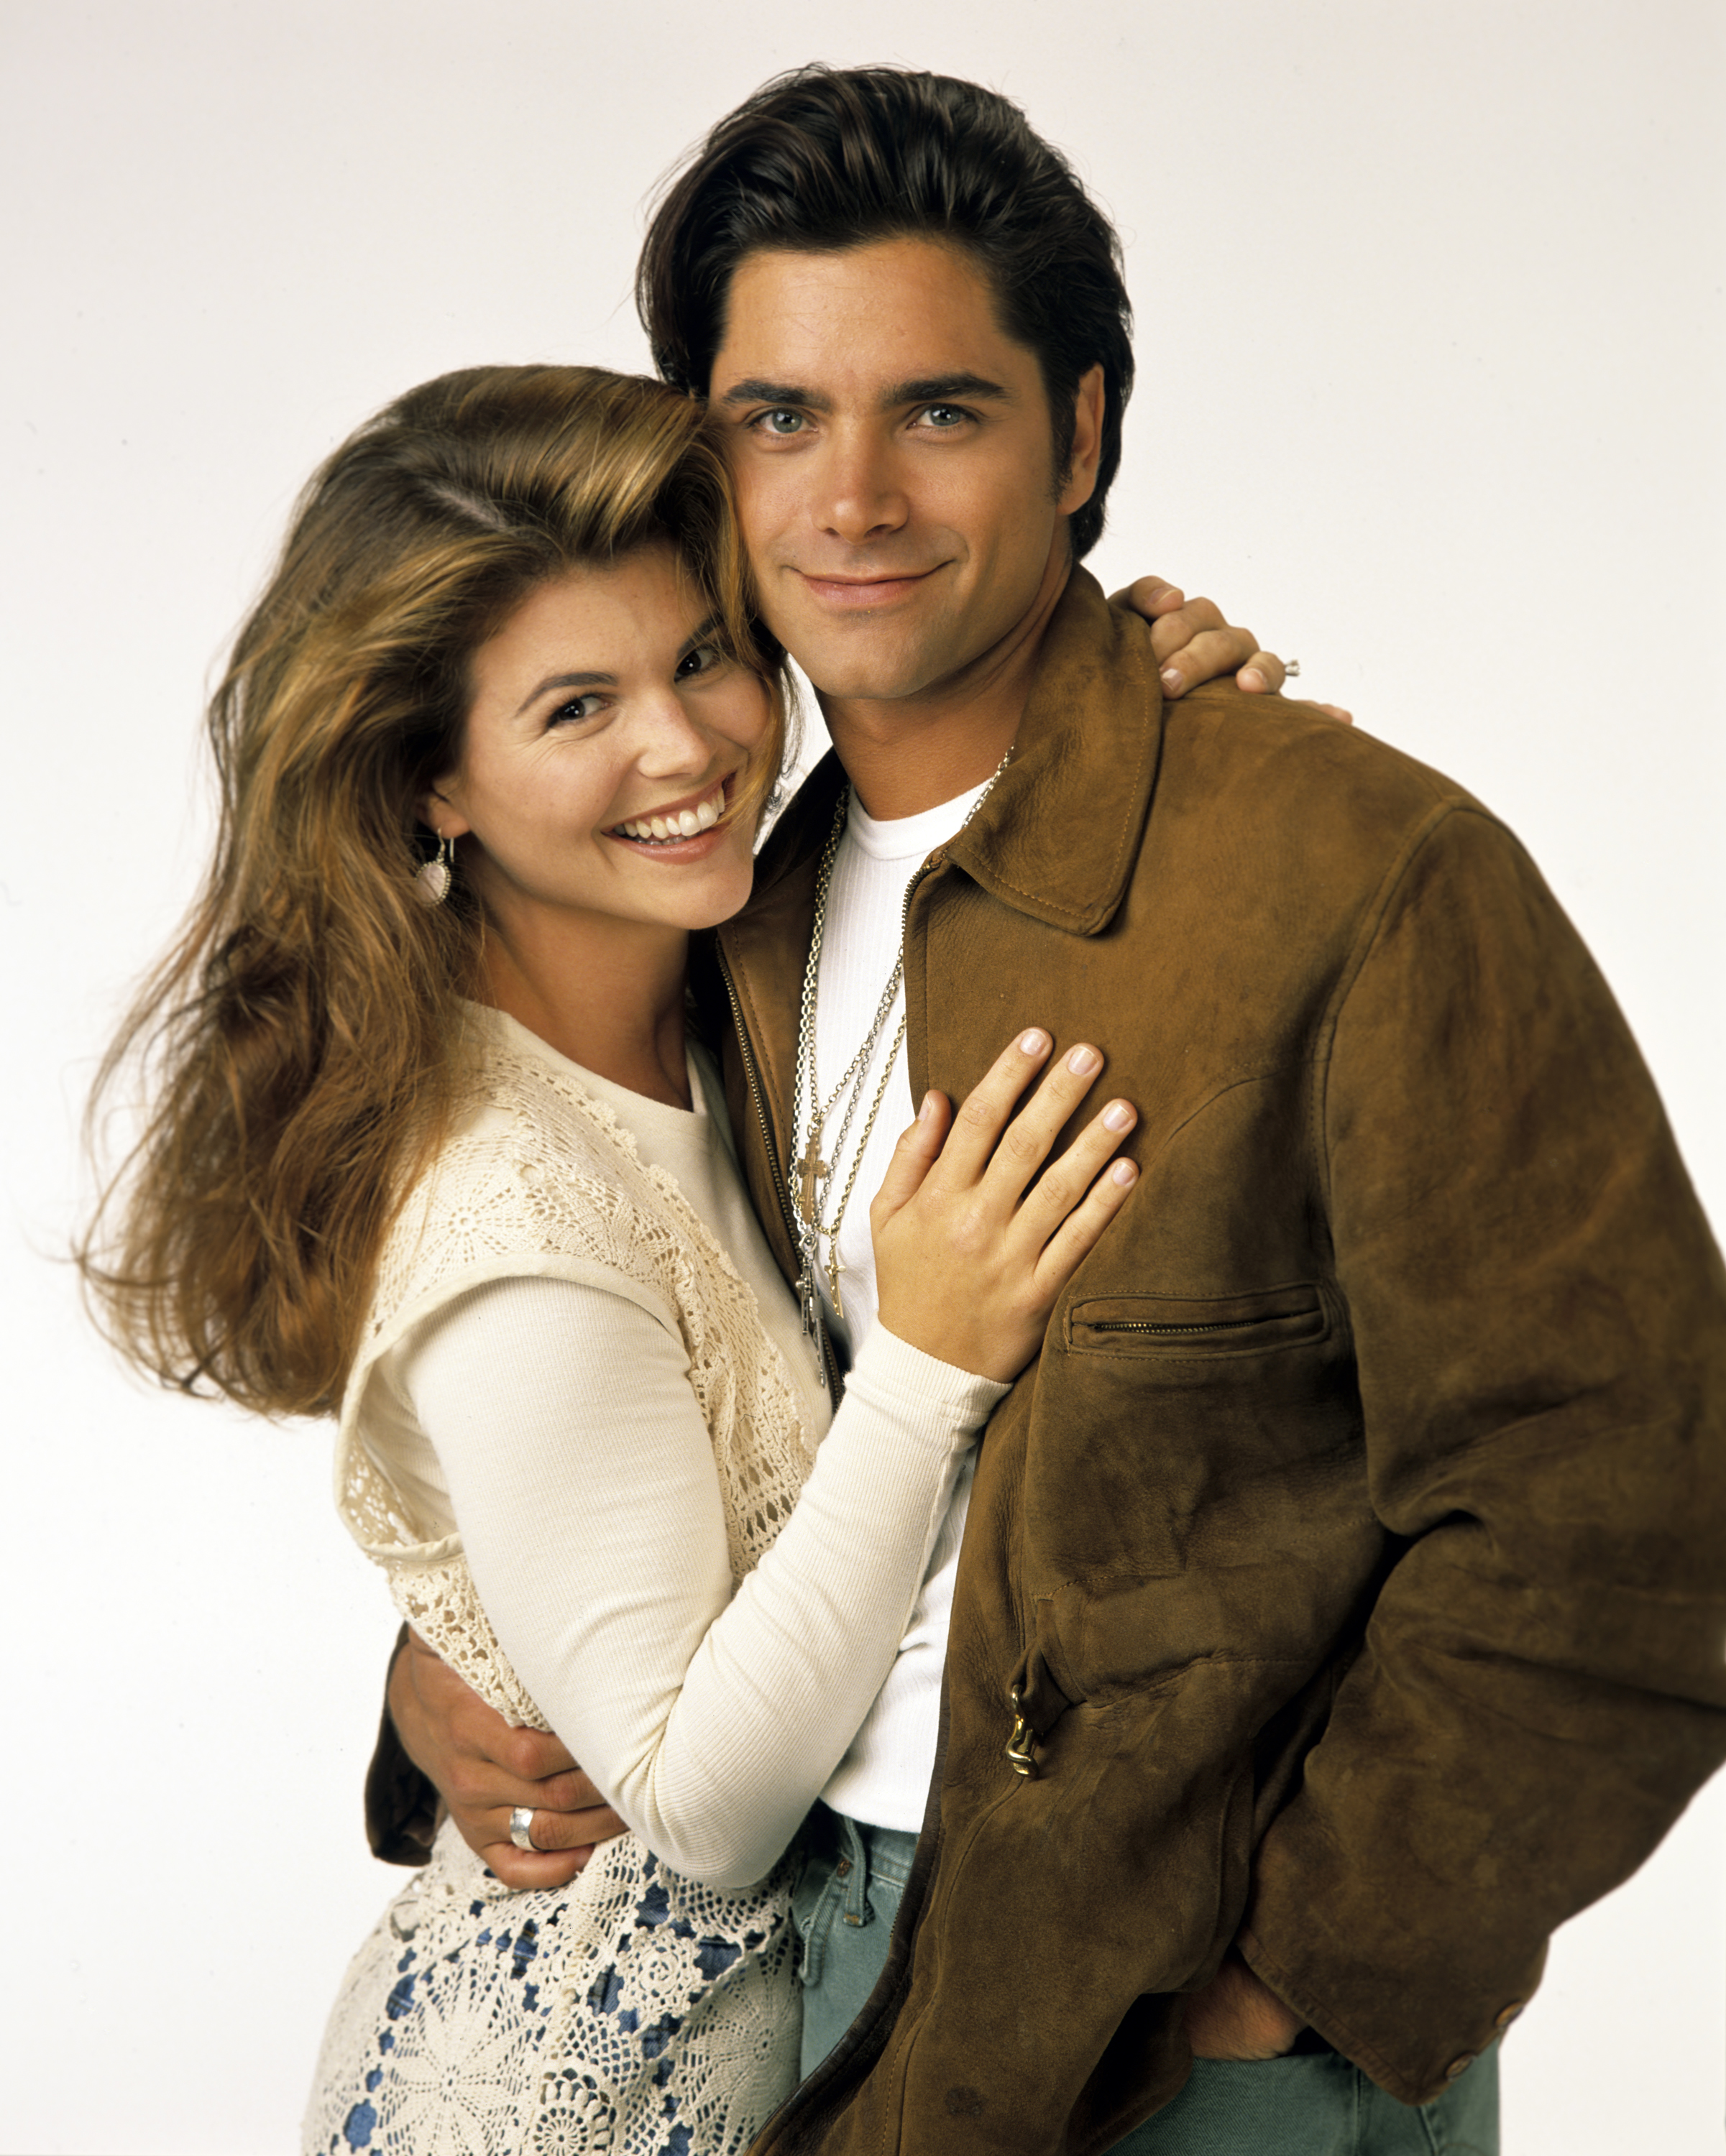 Lori Loughlin as Becky and John Stamos as Jesse on "Full House" on September 14, 1993 | Source: Getty Images